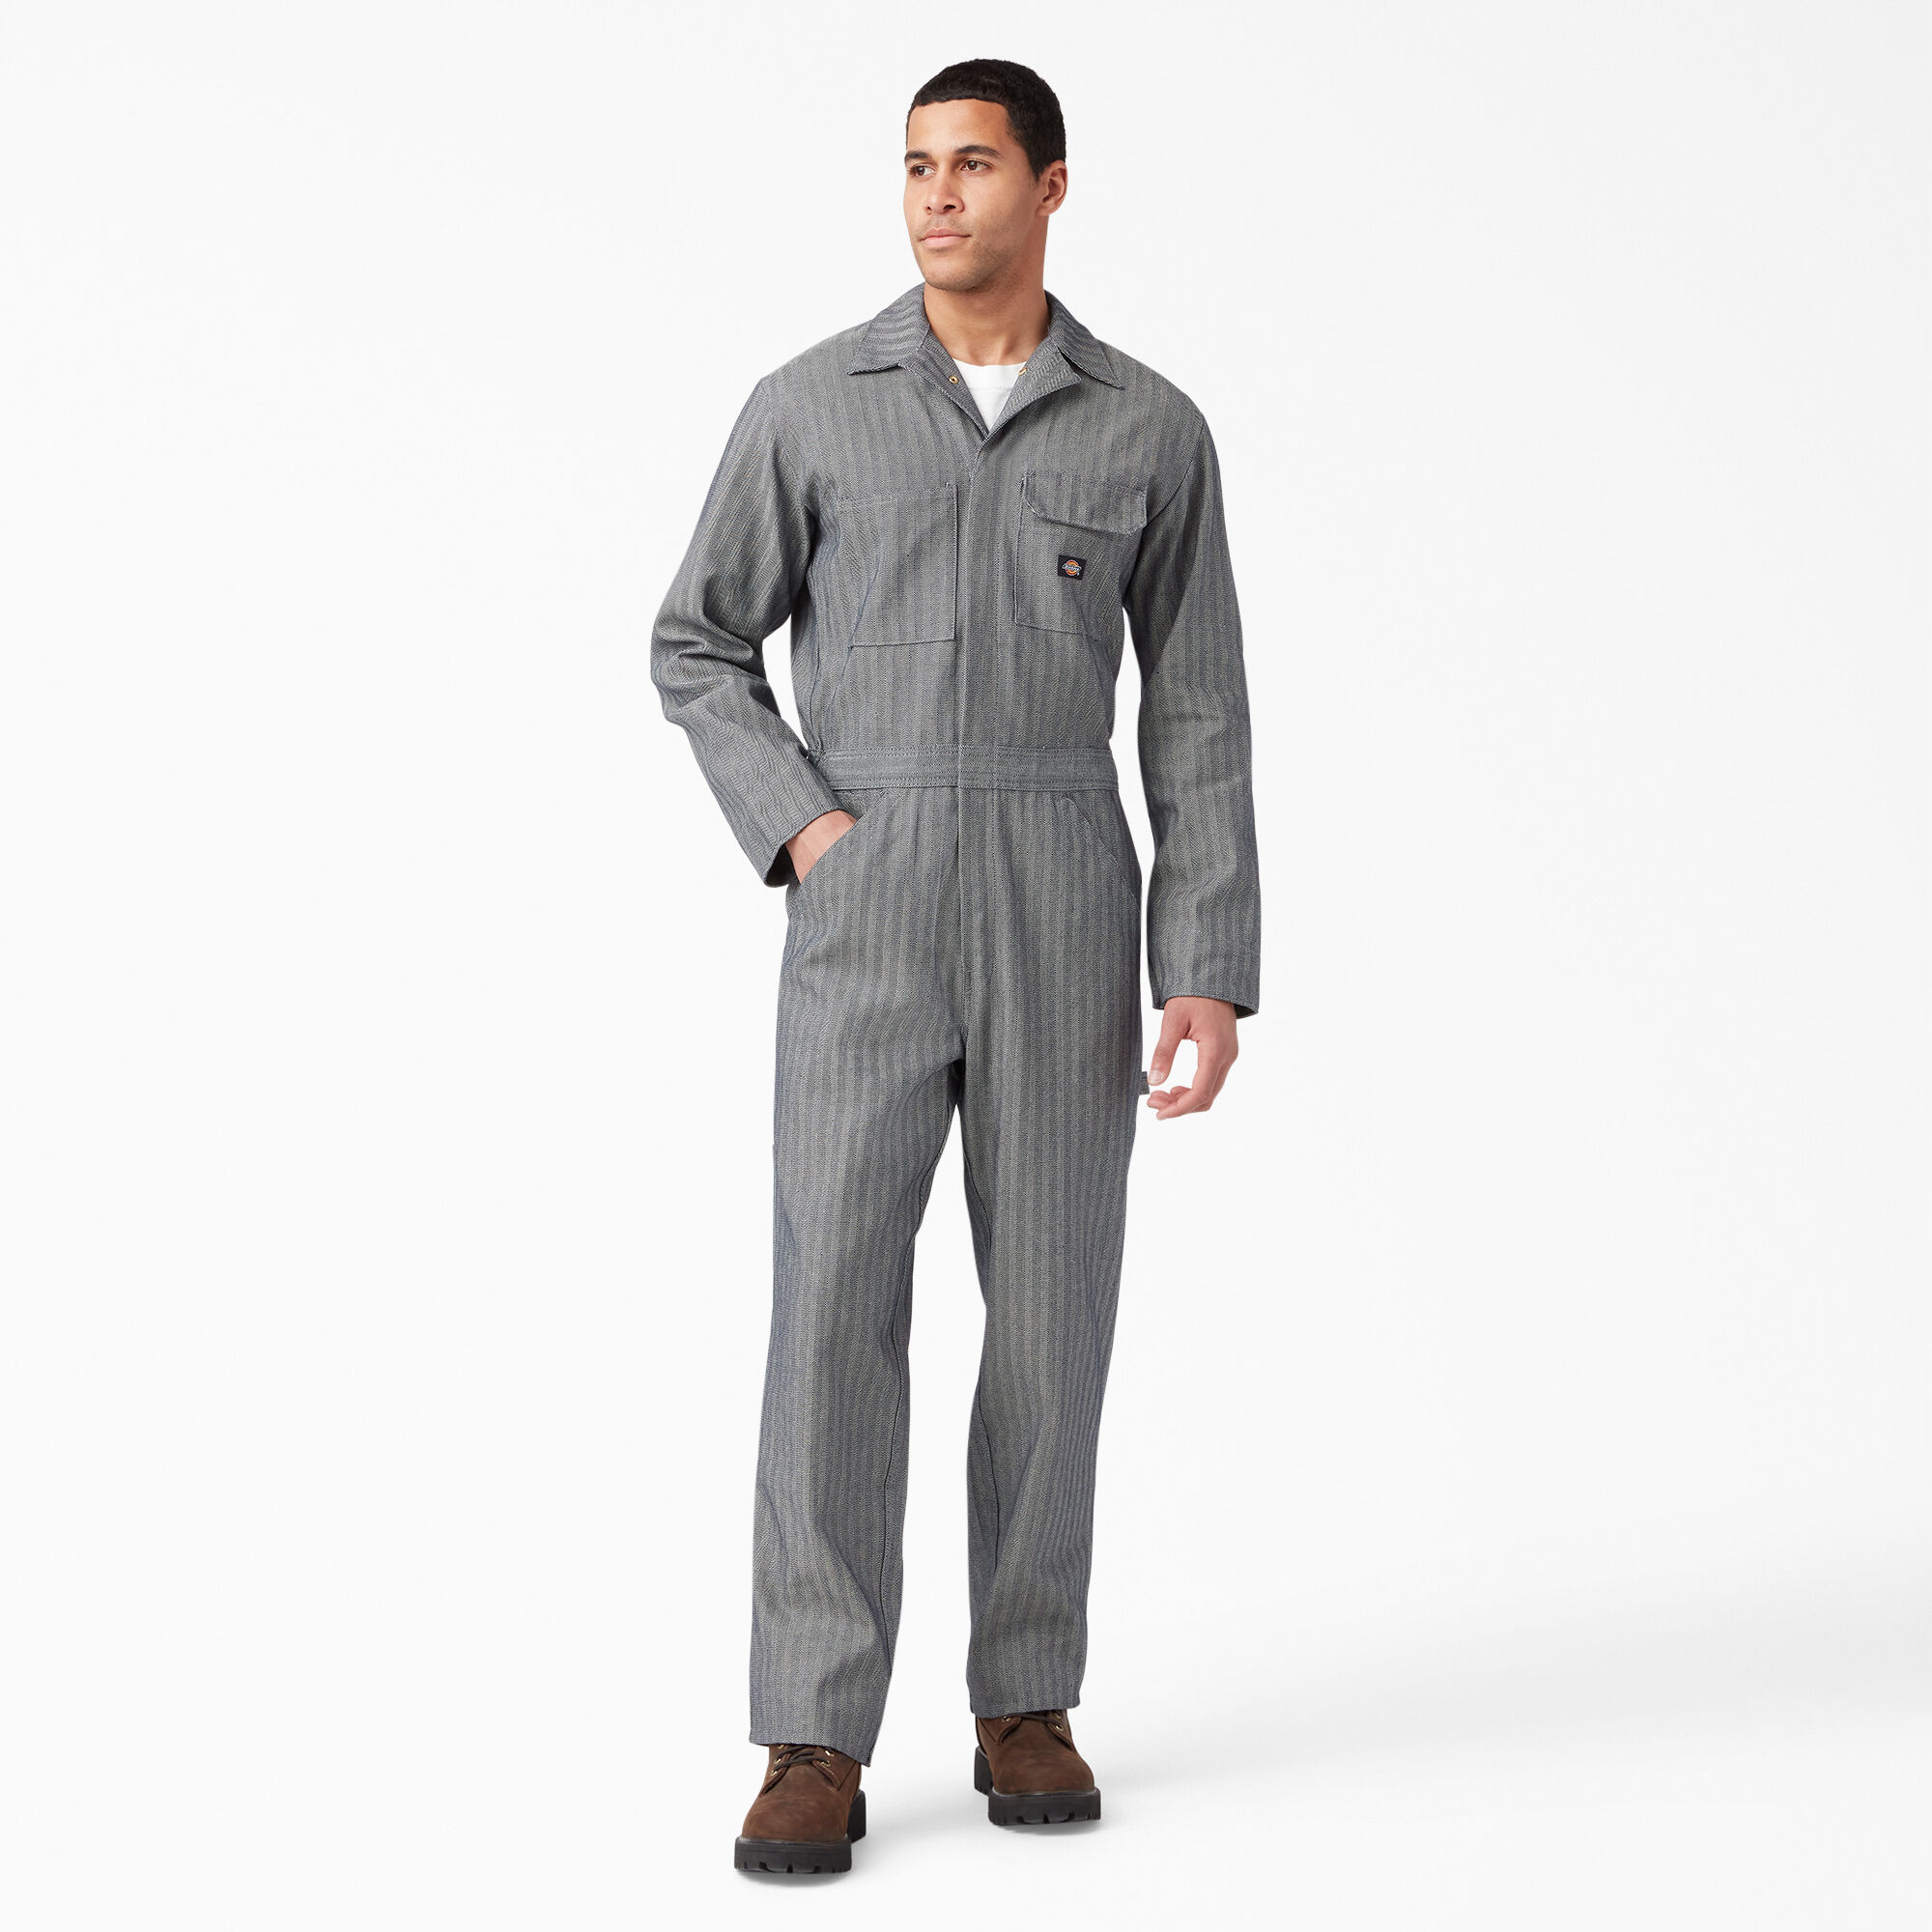 Dickies Jumpsuit Size Chart